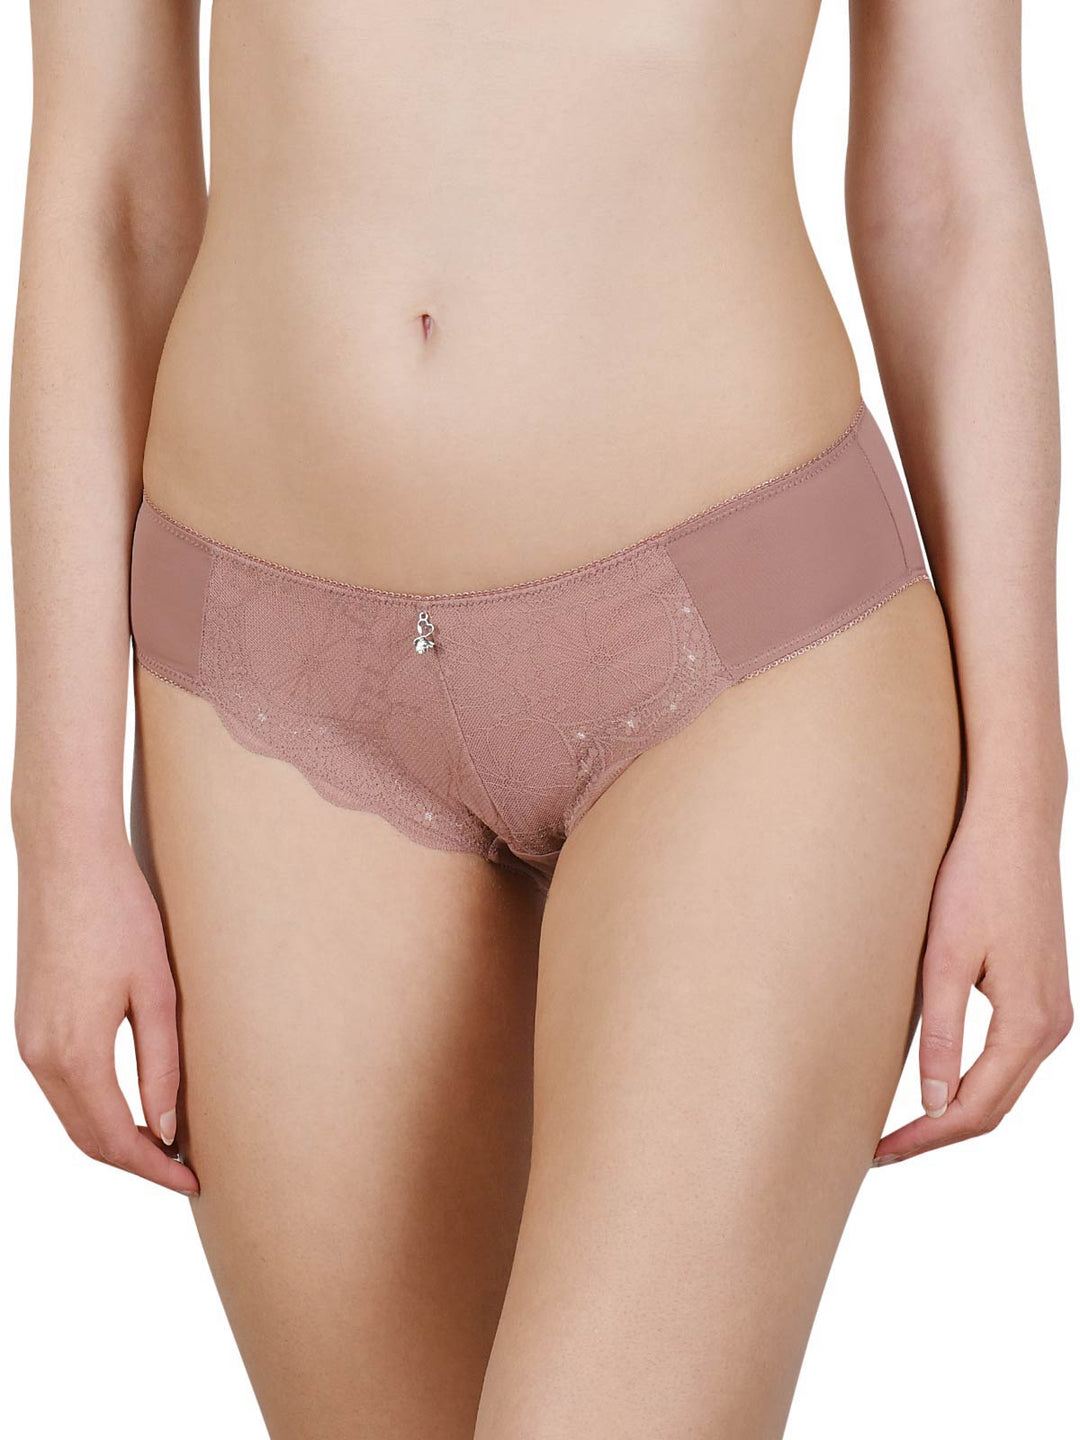 Cybele Lace Brief - Size X-Large